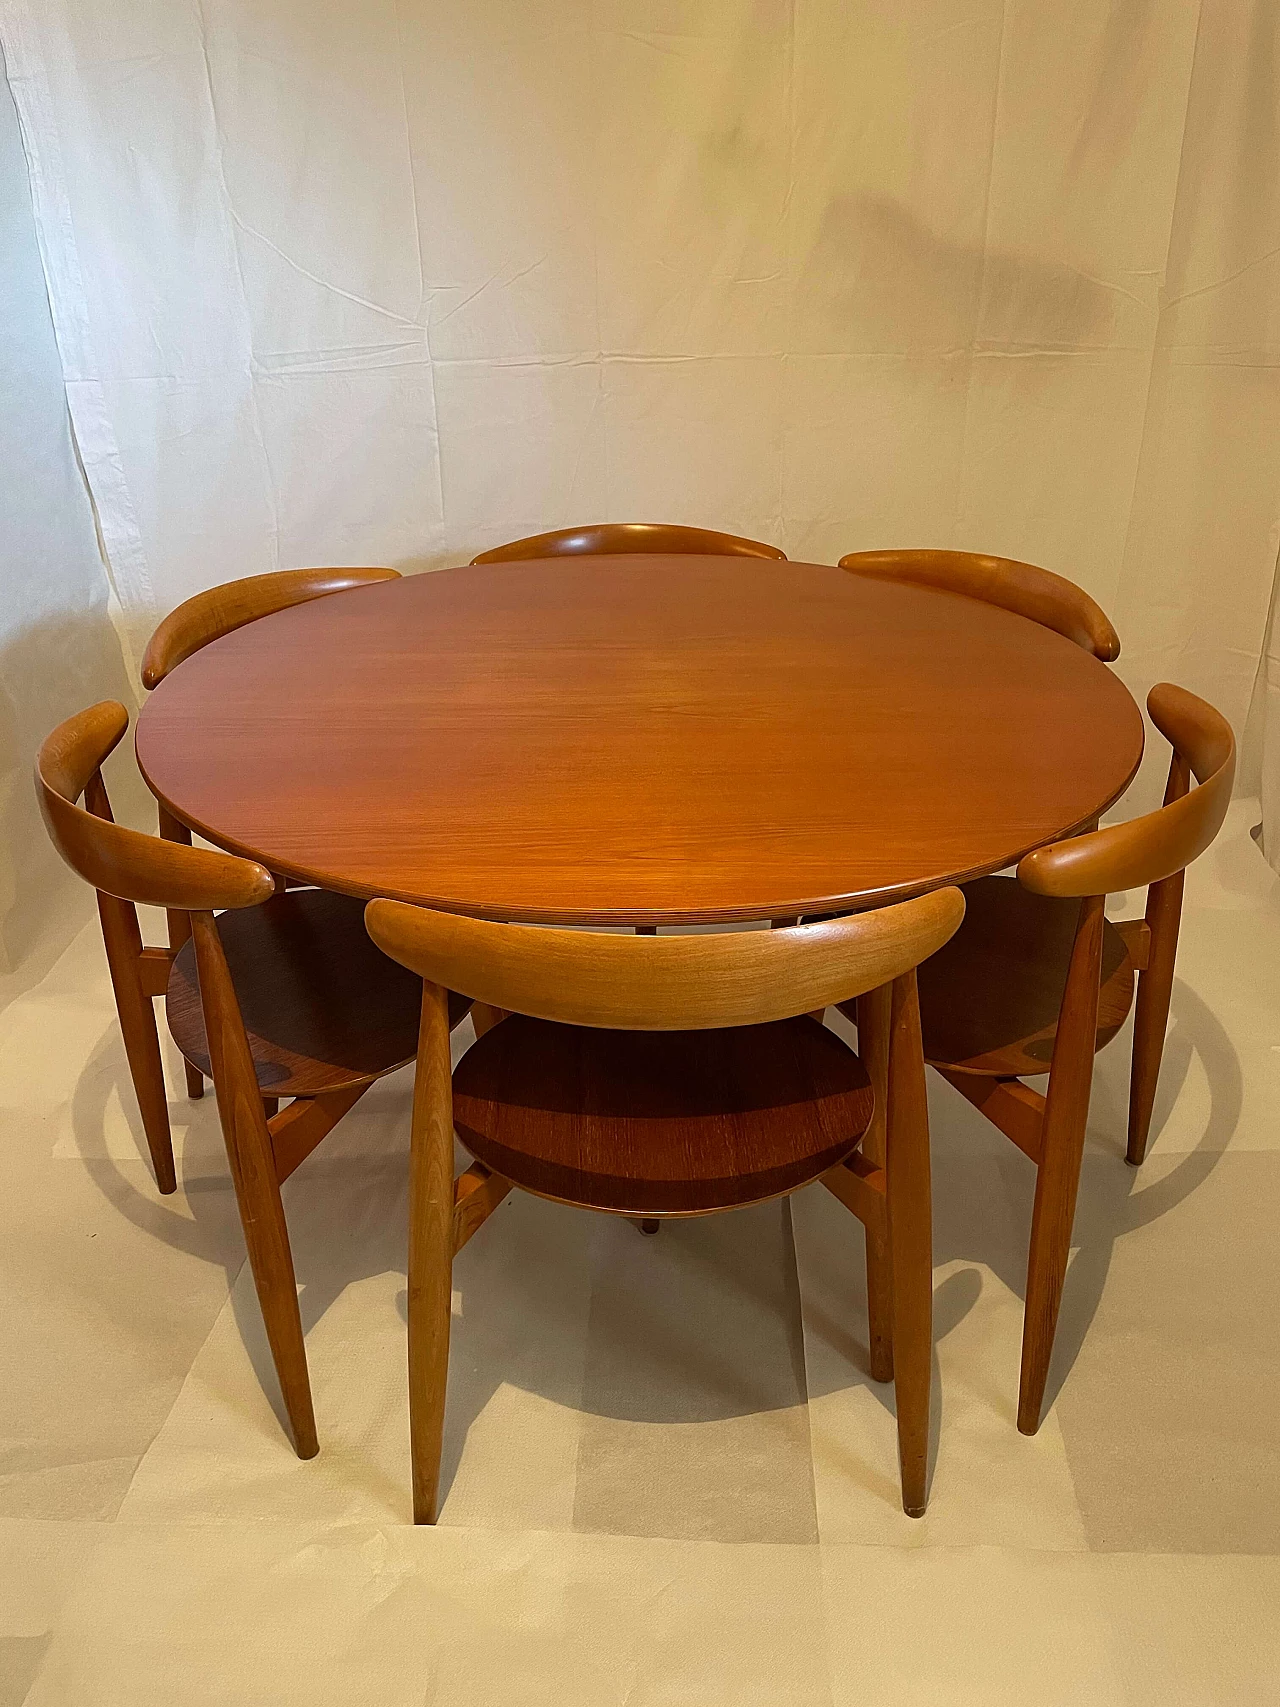 Heart round table by Hans Wegner for Fritz Hansen with 6 chairs, 1950s 1